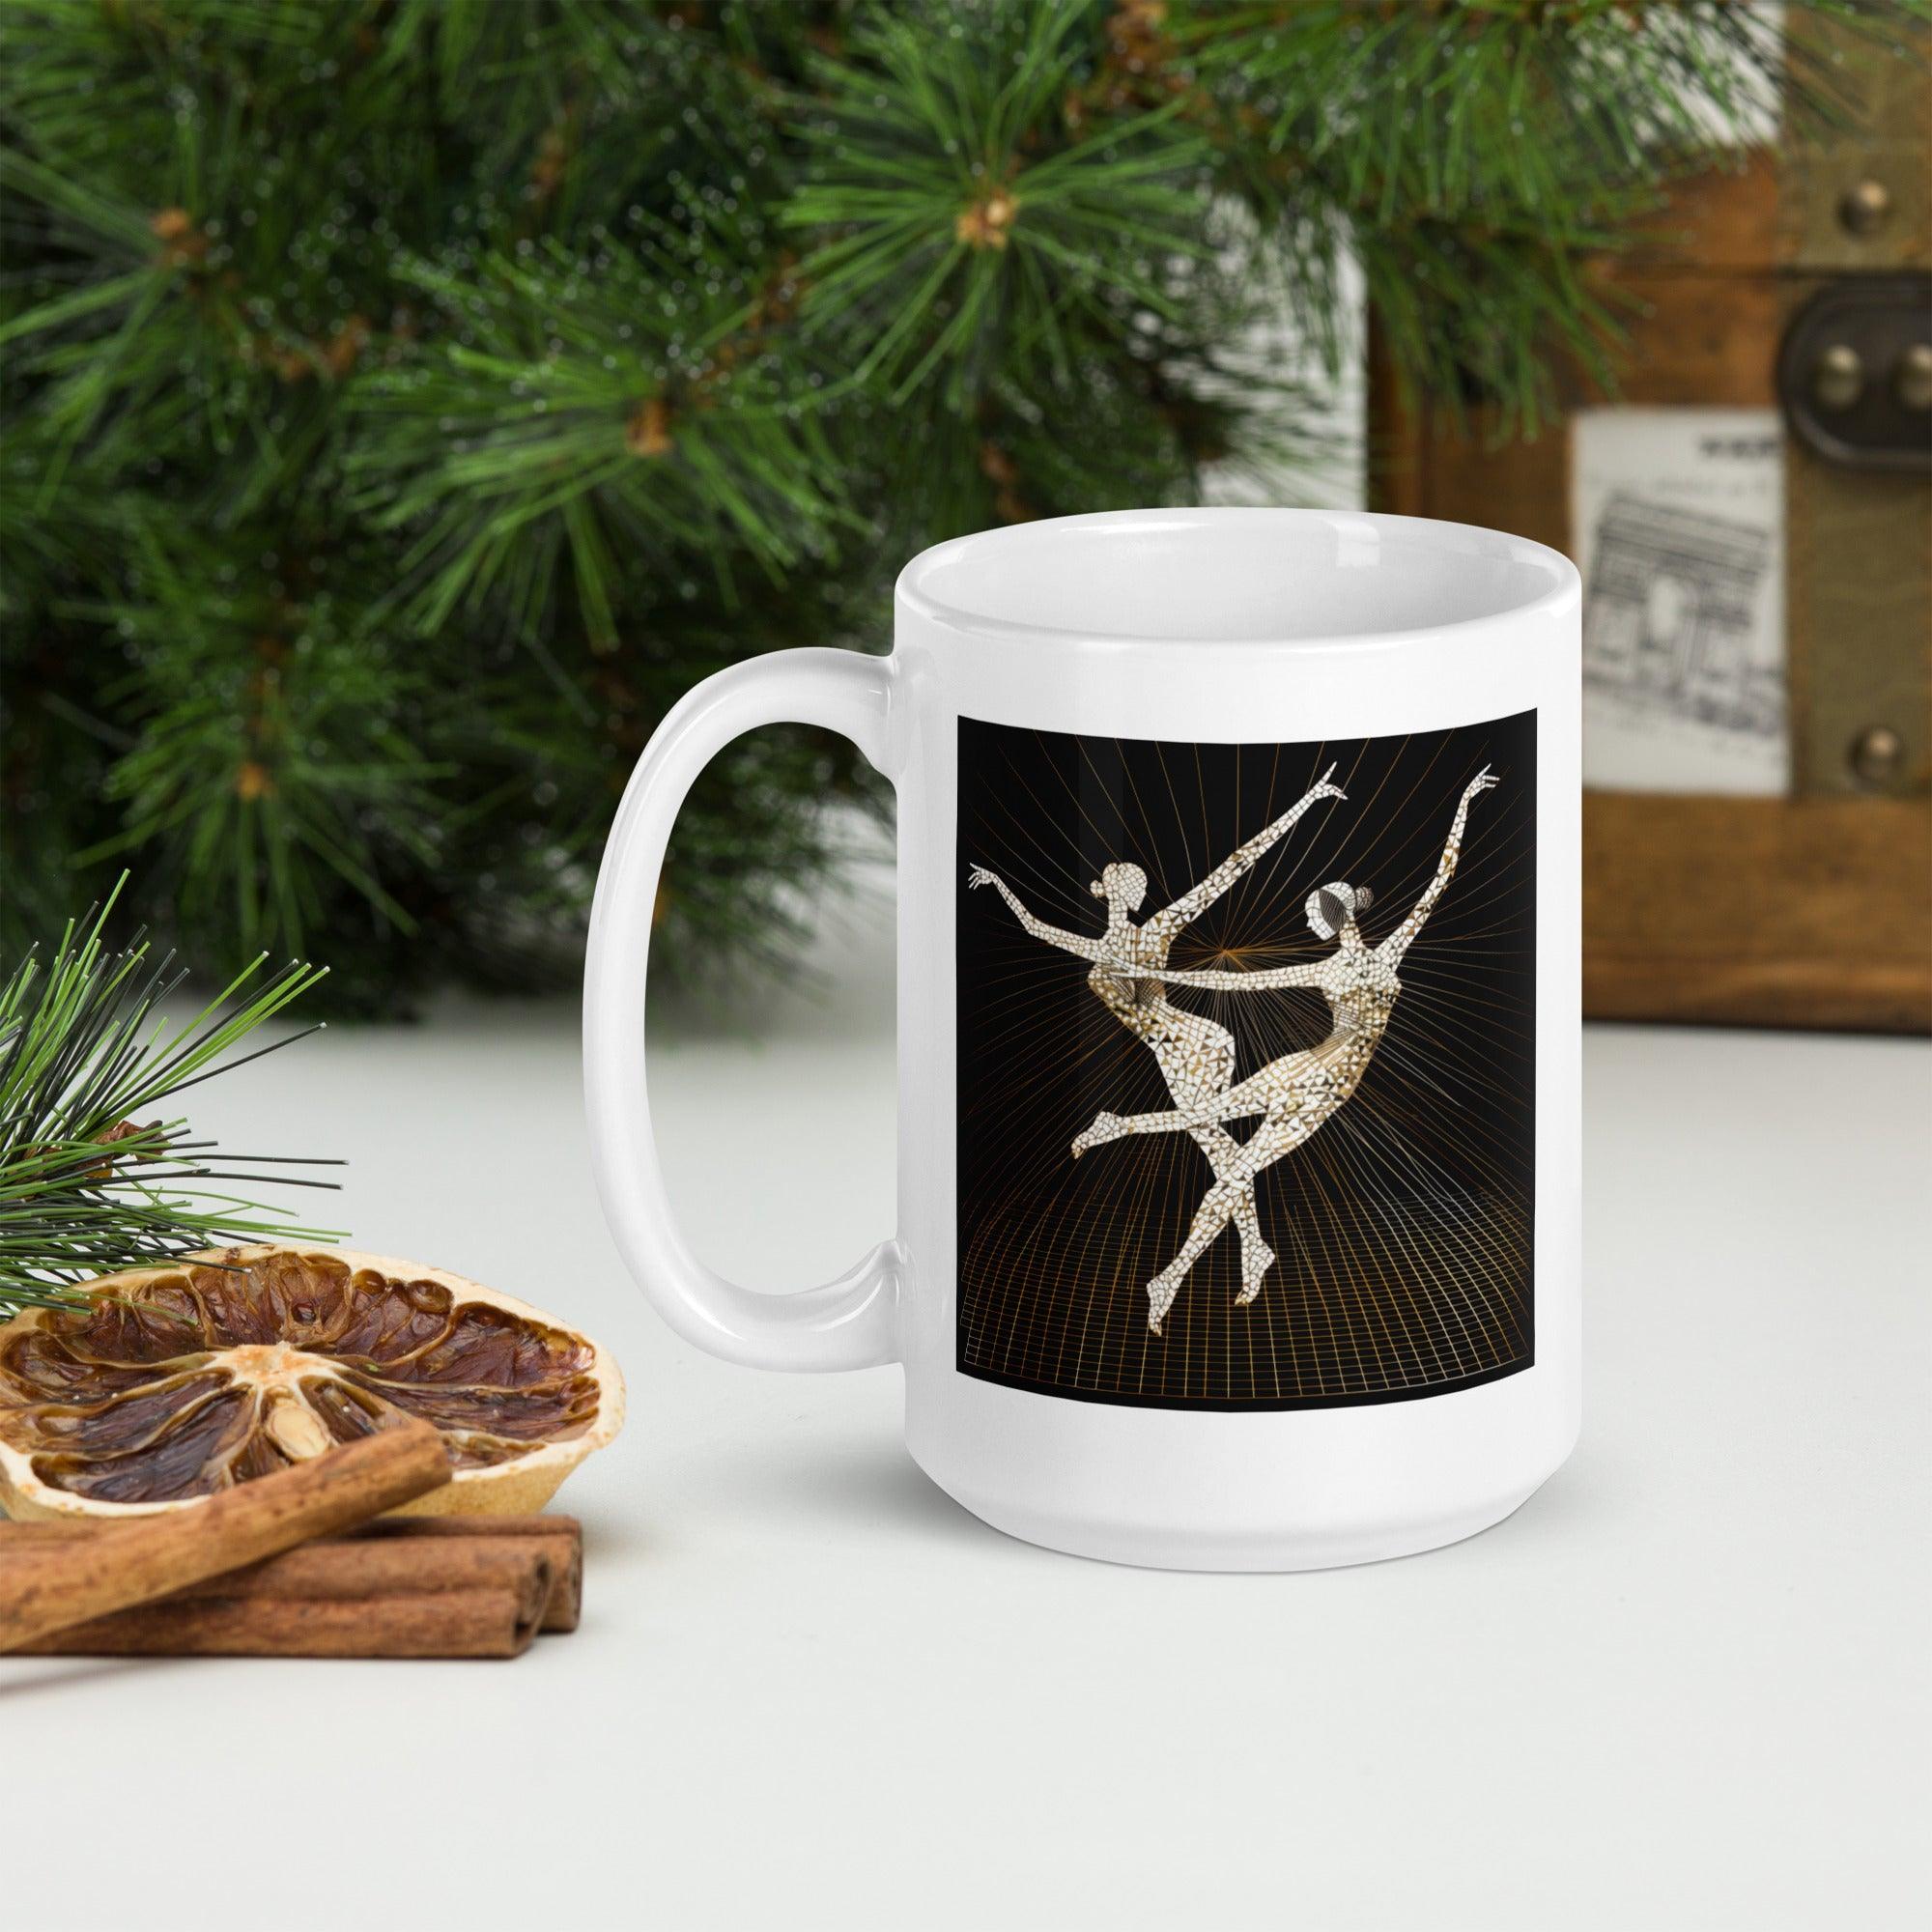 Dance-themed glossy white mug perfect for gift-giving